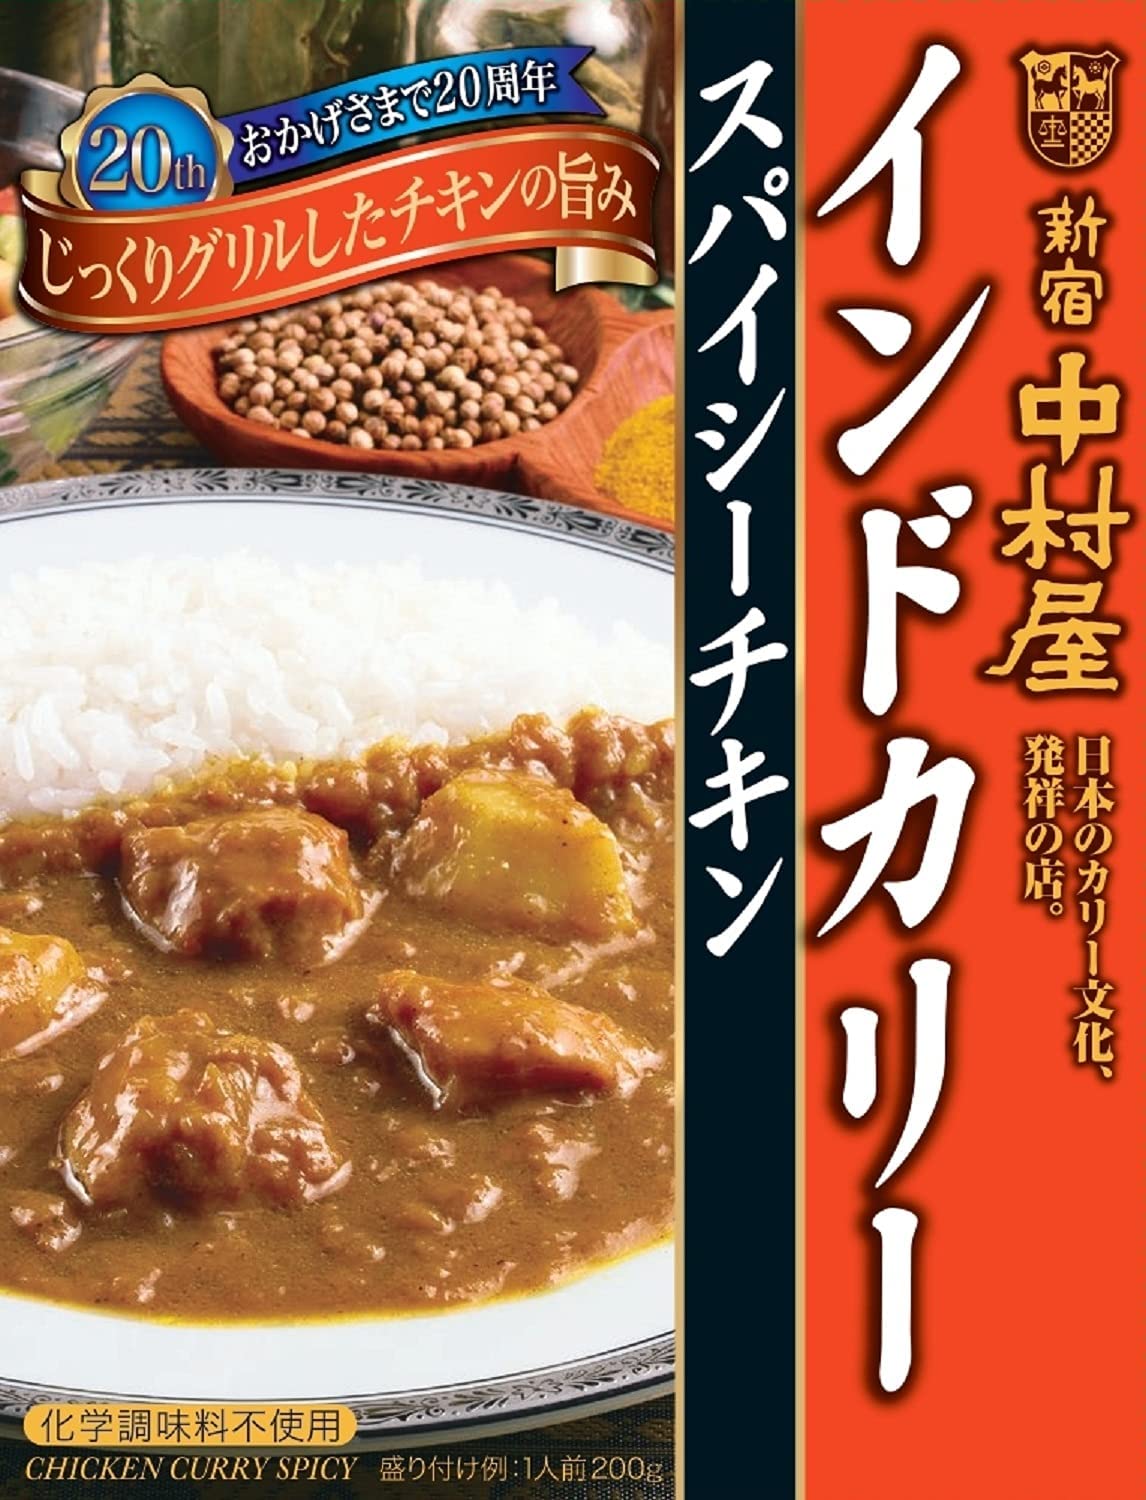 Japanese　StudioTokyo　Instant　Chicken　Grilled　Sauce　Curry　Spicy　Indian　Food　Nakamur　–